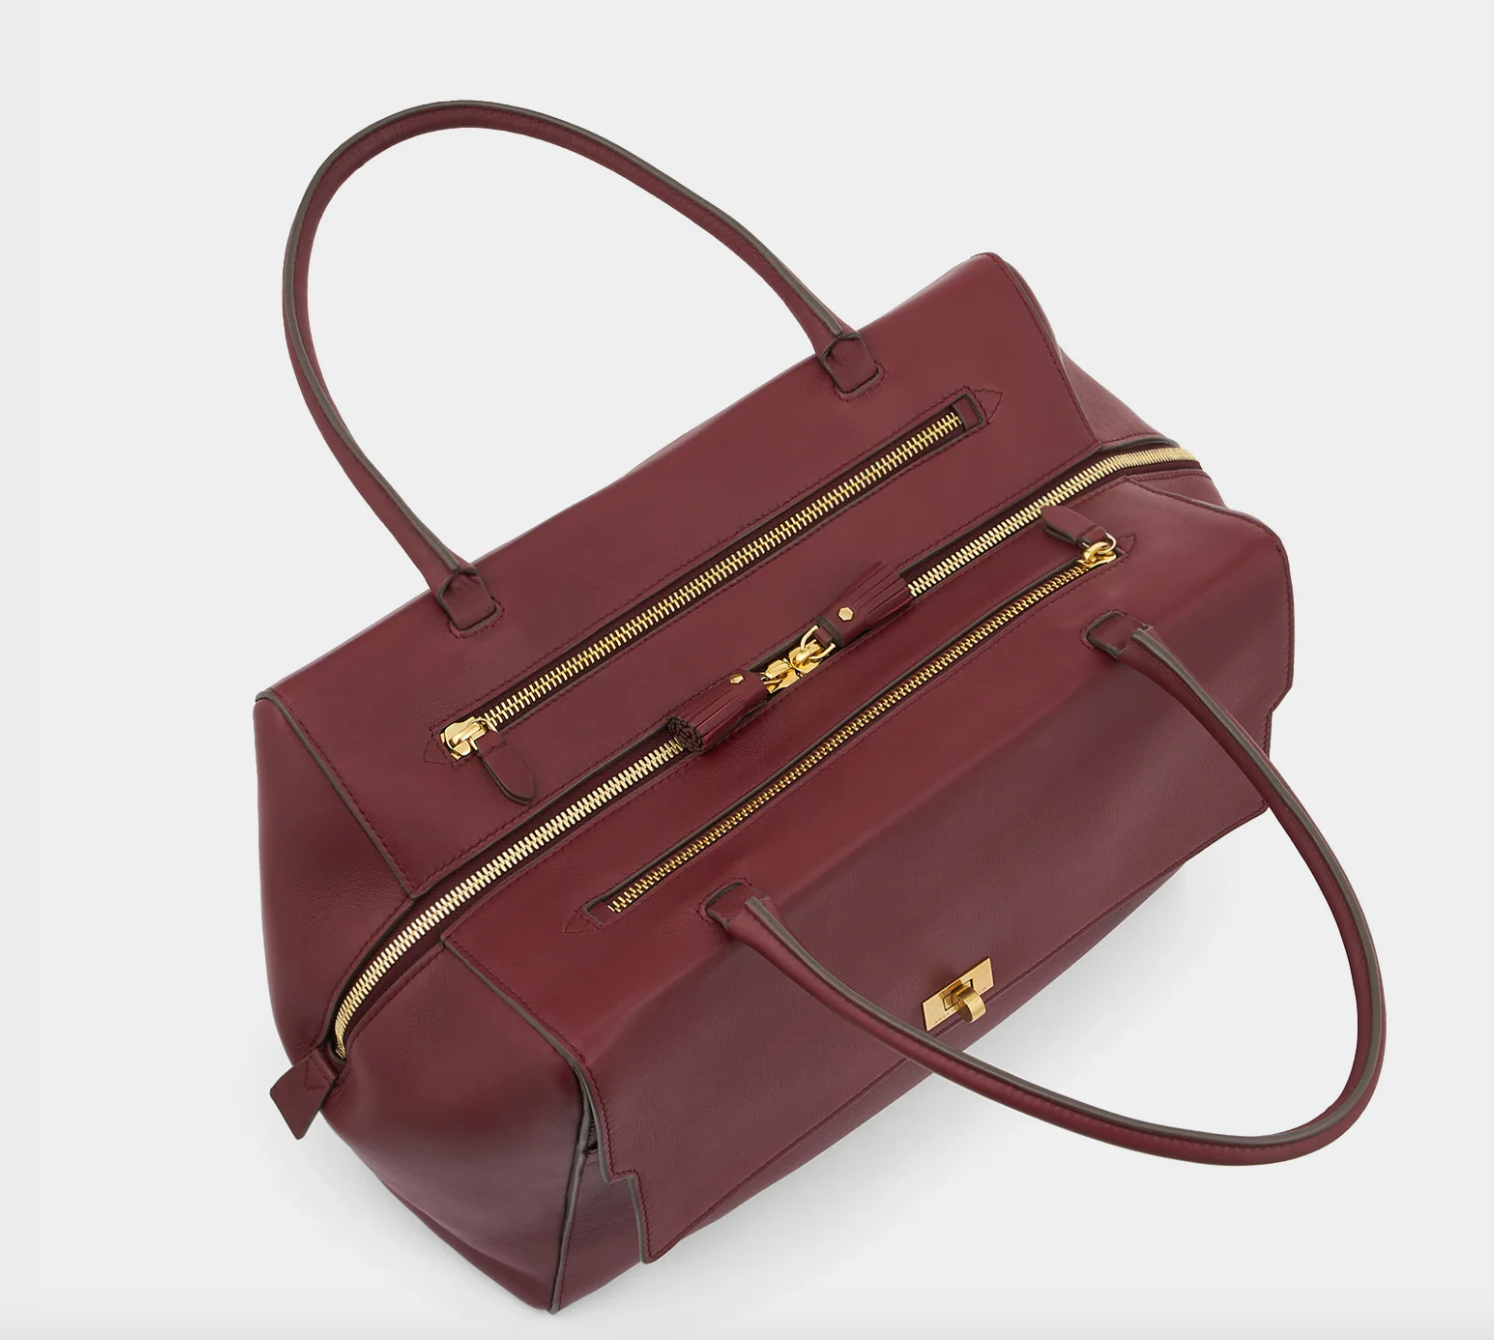 Hetre Alresford Hampshire Accessory Store Anya Hindmarch Rosewood Large Seaton